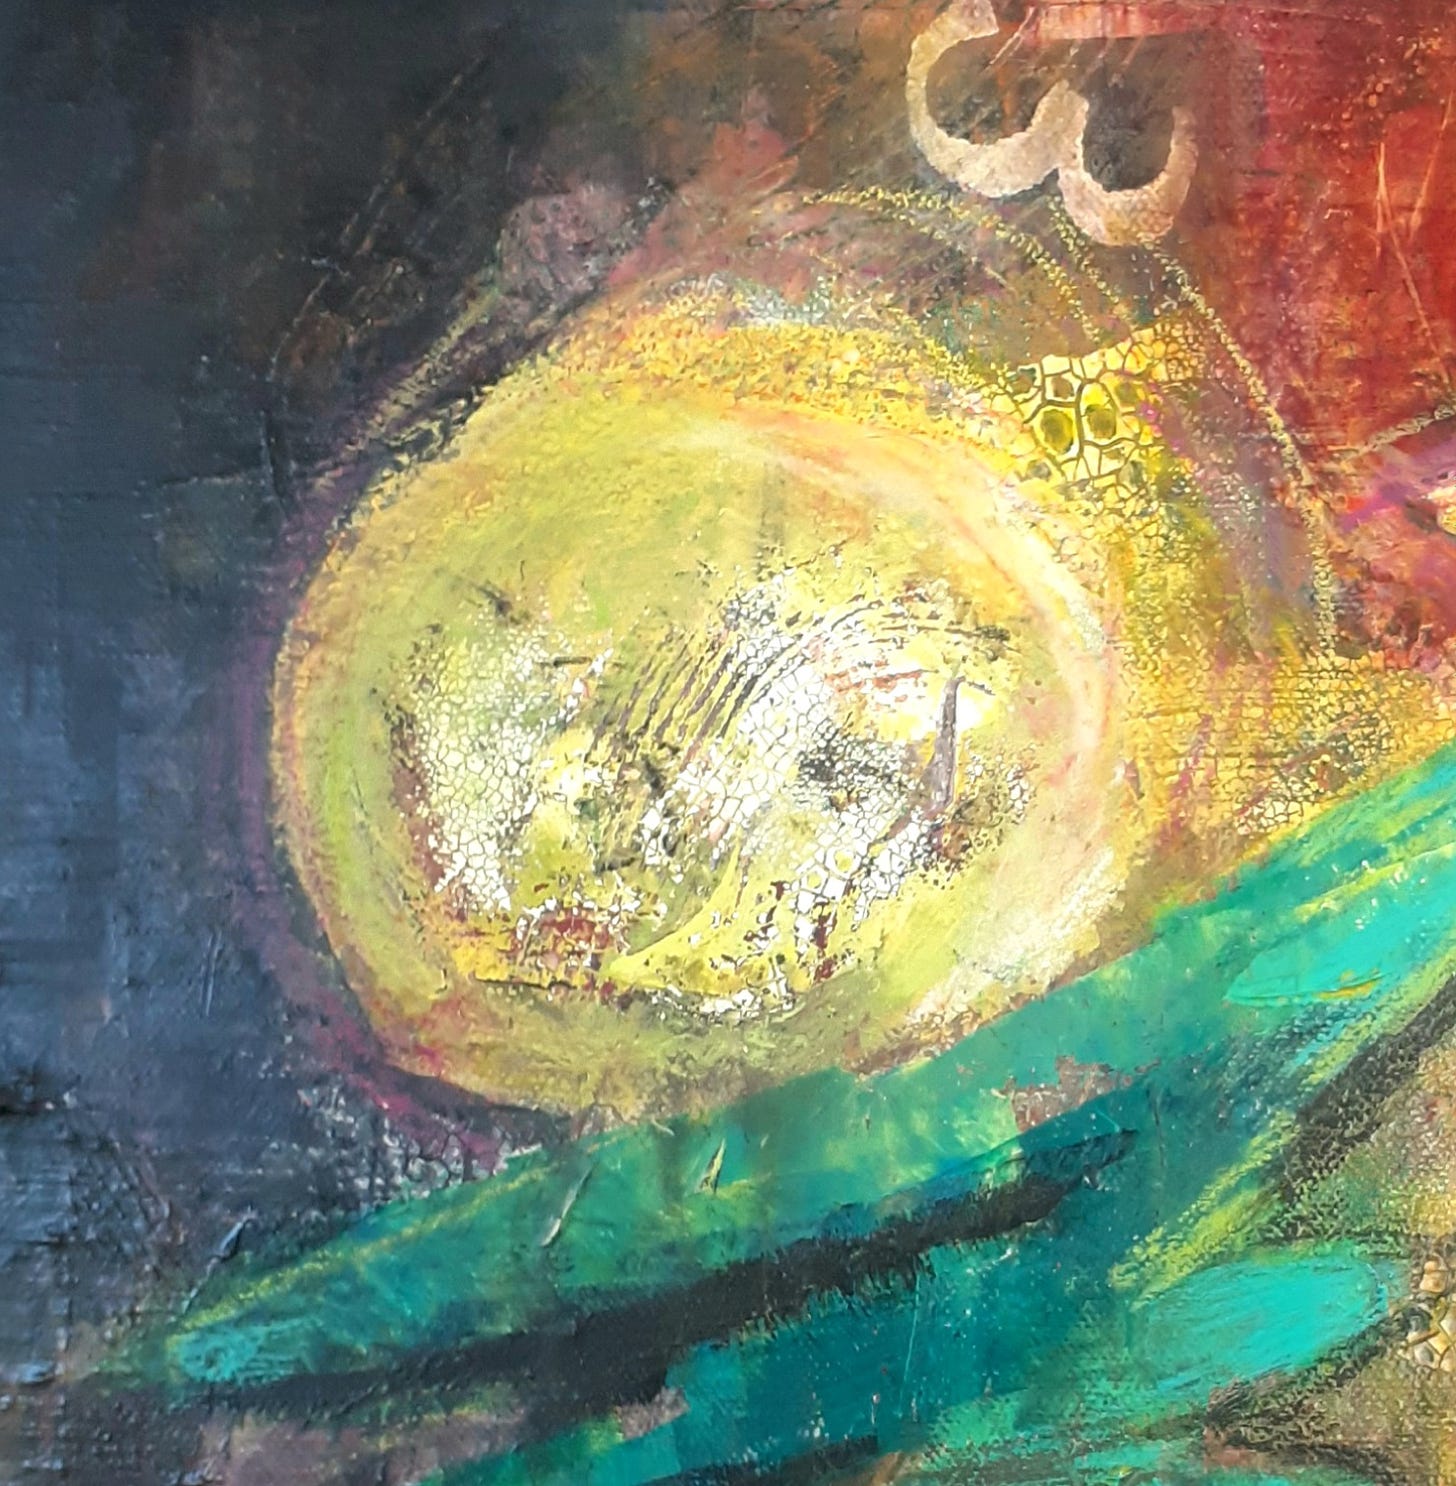 Mixed Media painting of a yellow orb on textured background